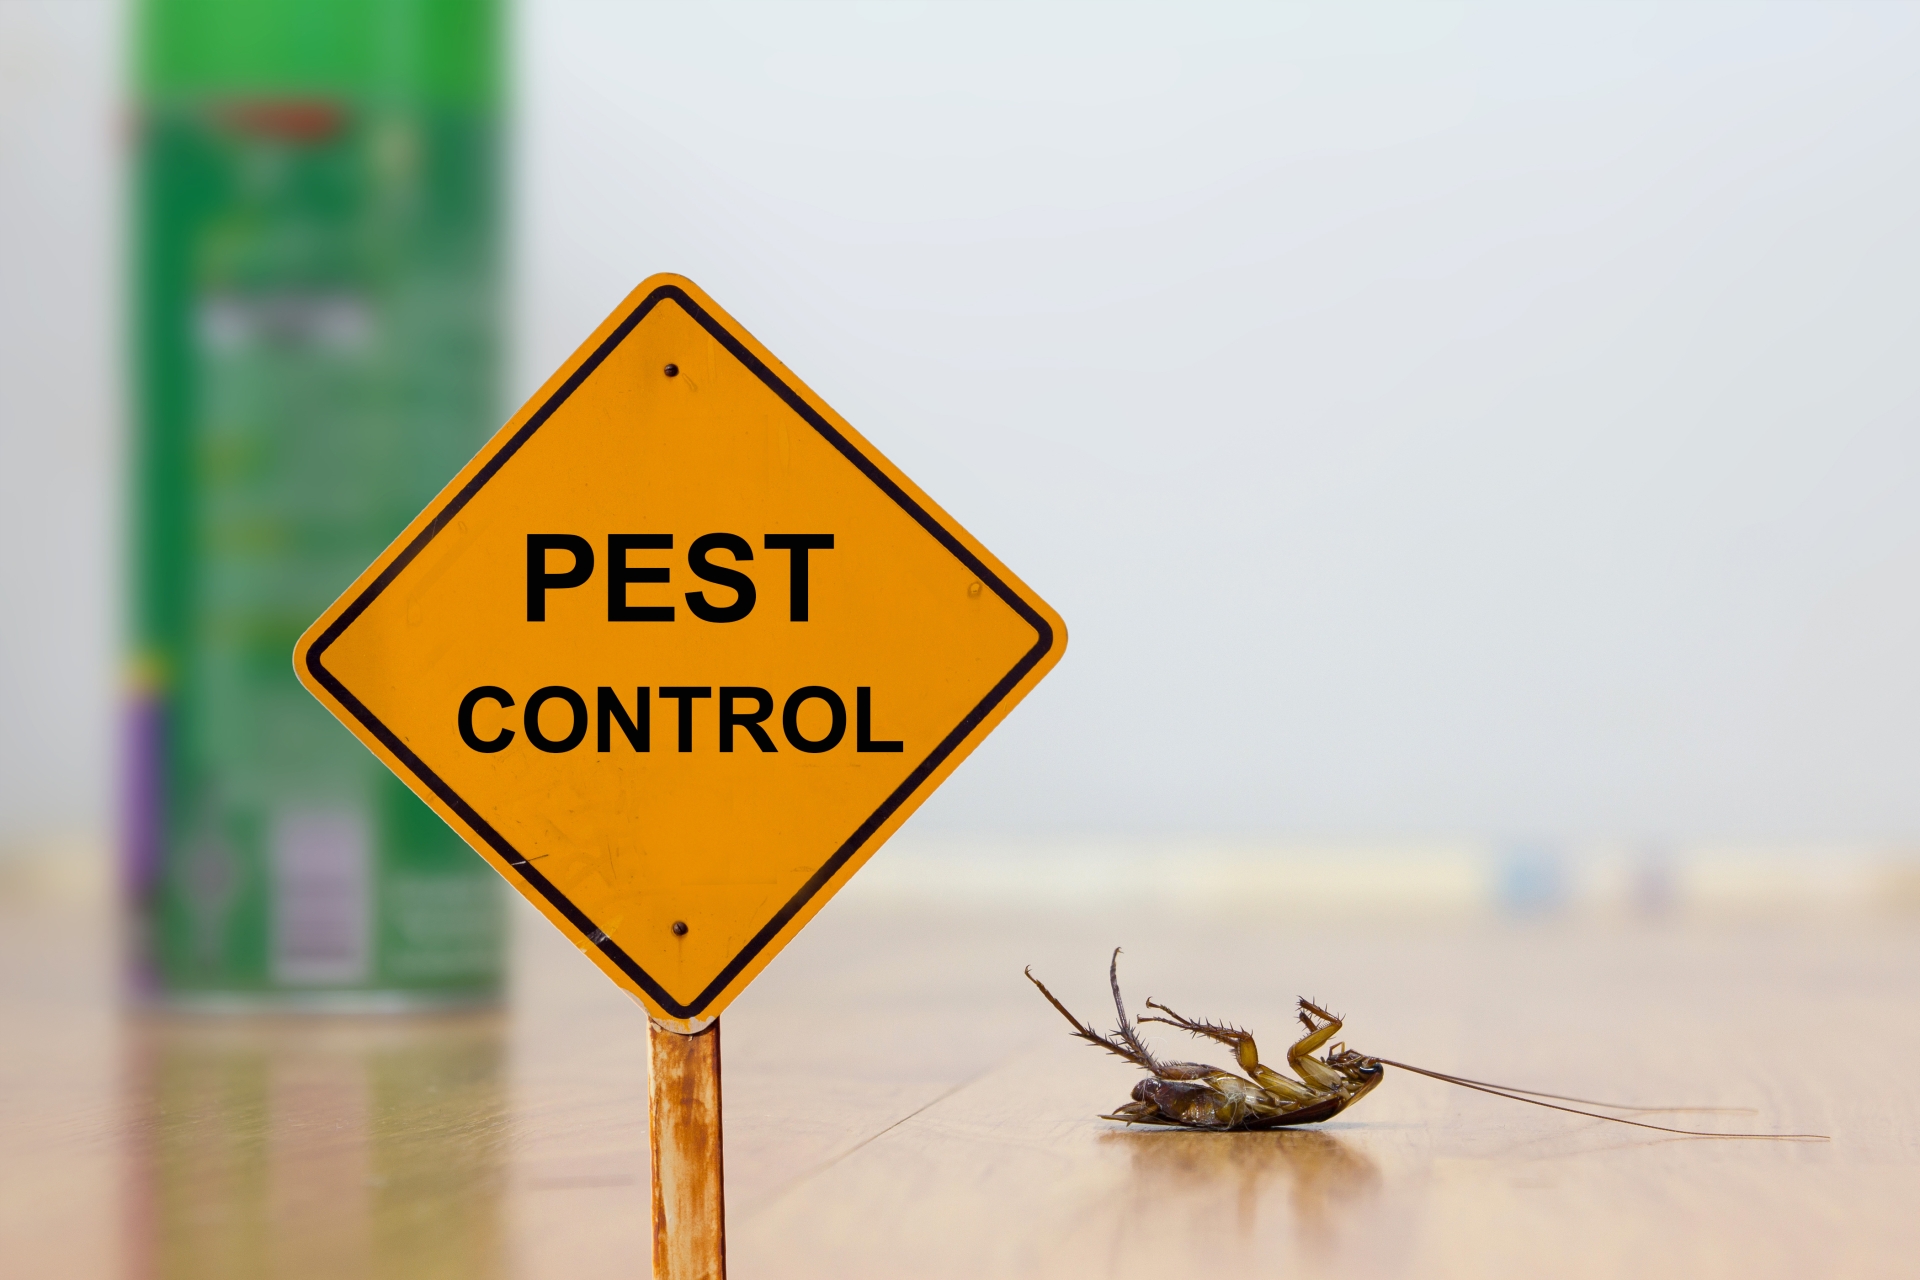 24 Hour Pest Control, Pest Control in Cheshunt, Waltham Cross, EN8. Call Now 020 8166 9746